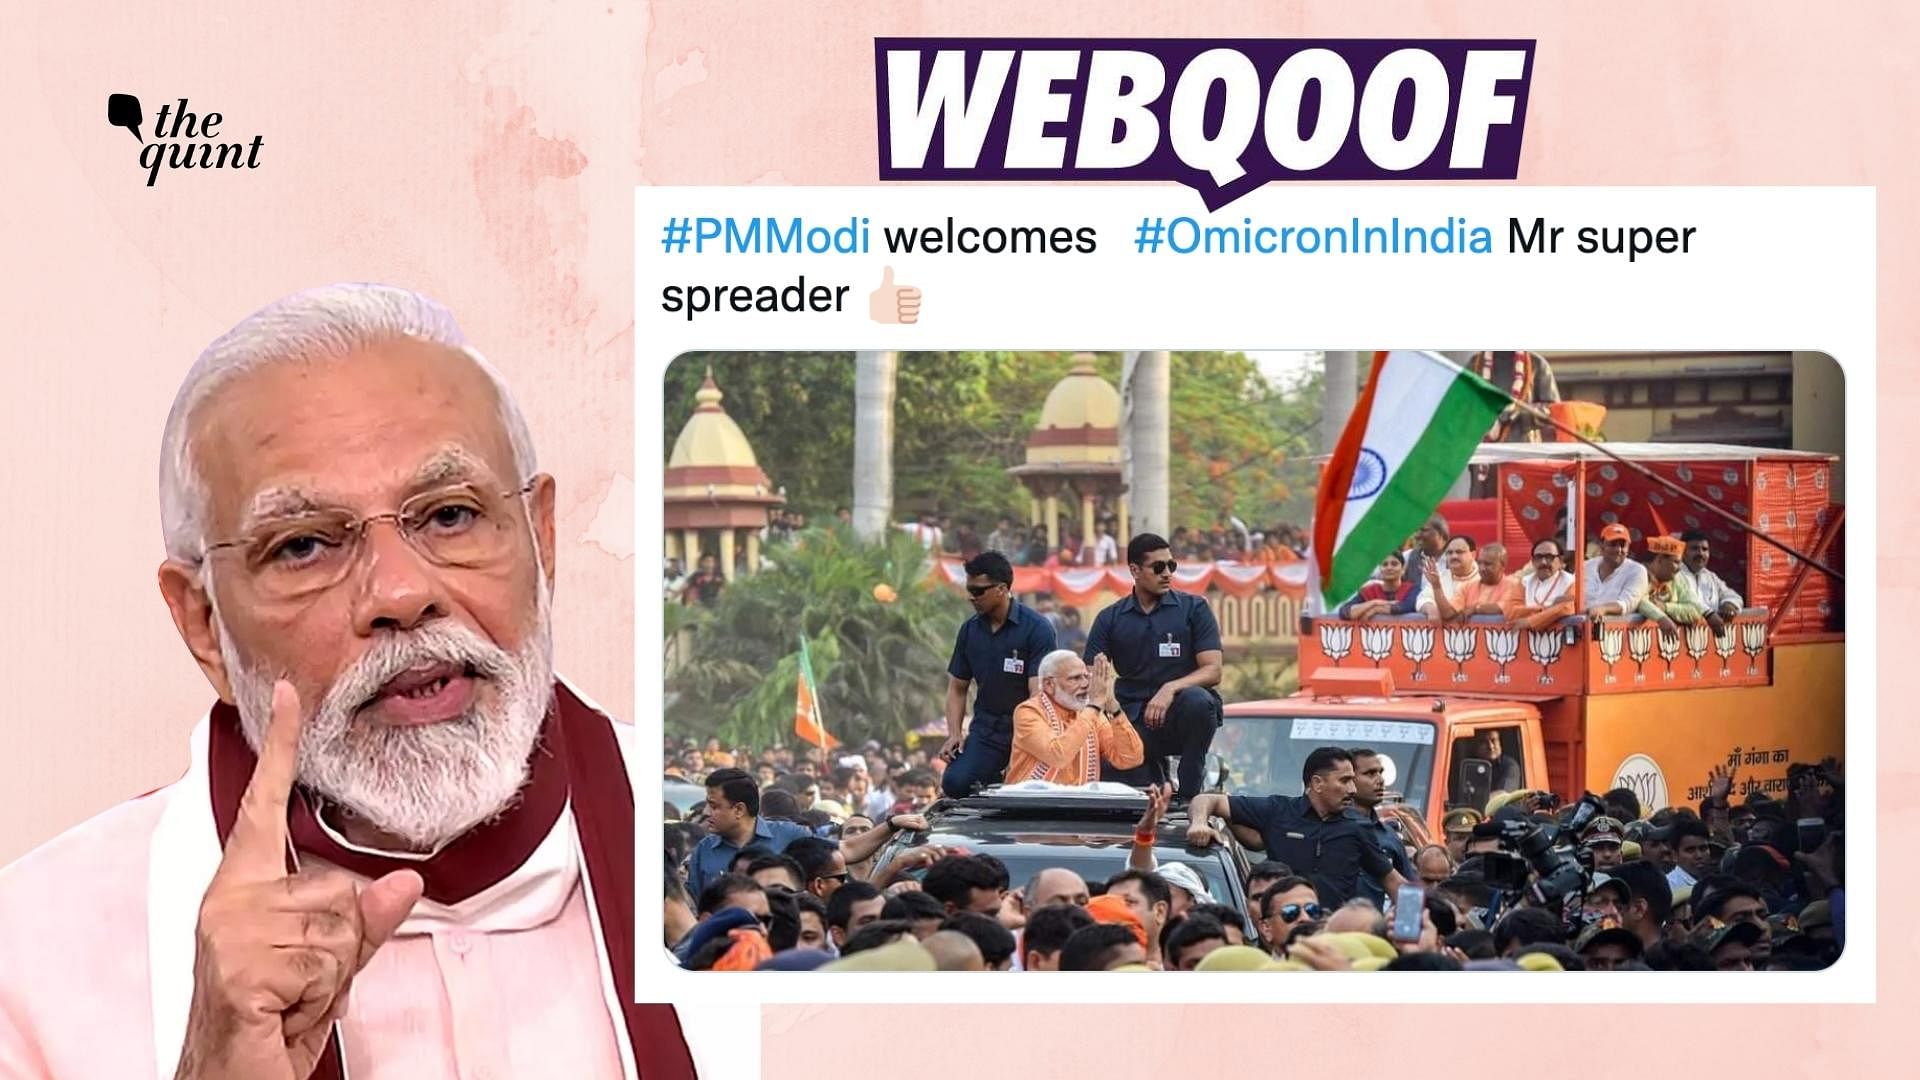 <div class="paragraphs"><p>The claim states that it is a recent photo where Prime Minister Narendra Modi can be seen greeting supporters ahead of the 2019 Lok Sabha polls.&nbsp;</p></div>